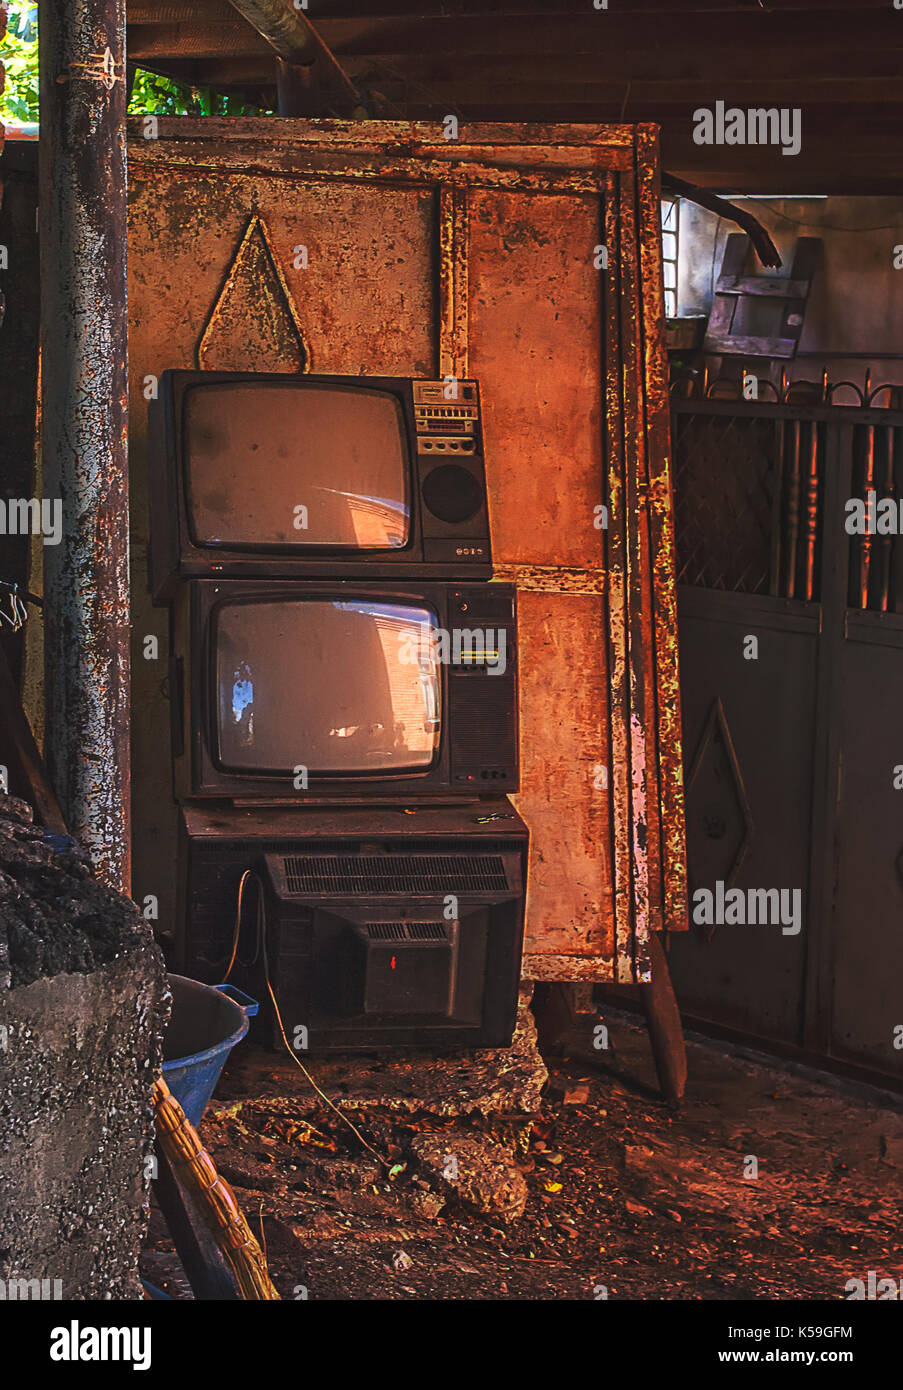 Vintage old television TV sets broken and ruined inside abandoned house Stock Photo